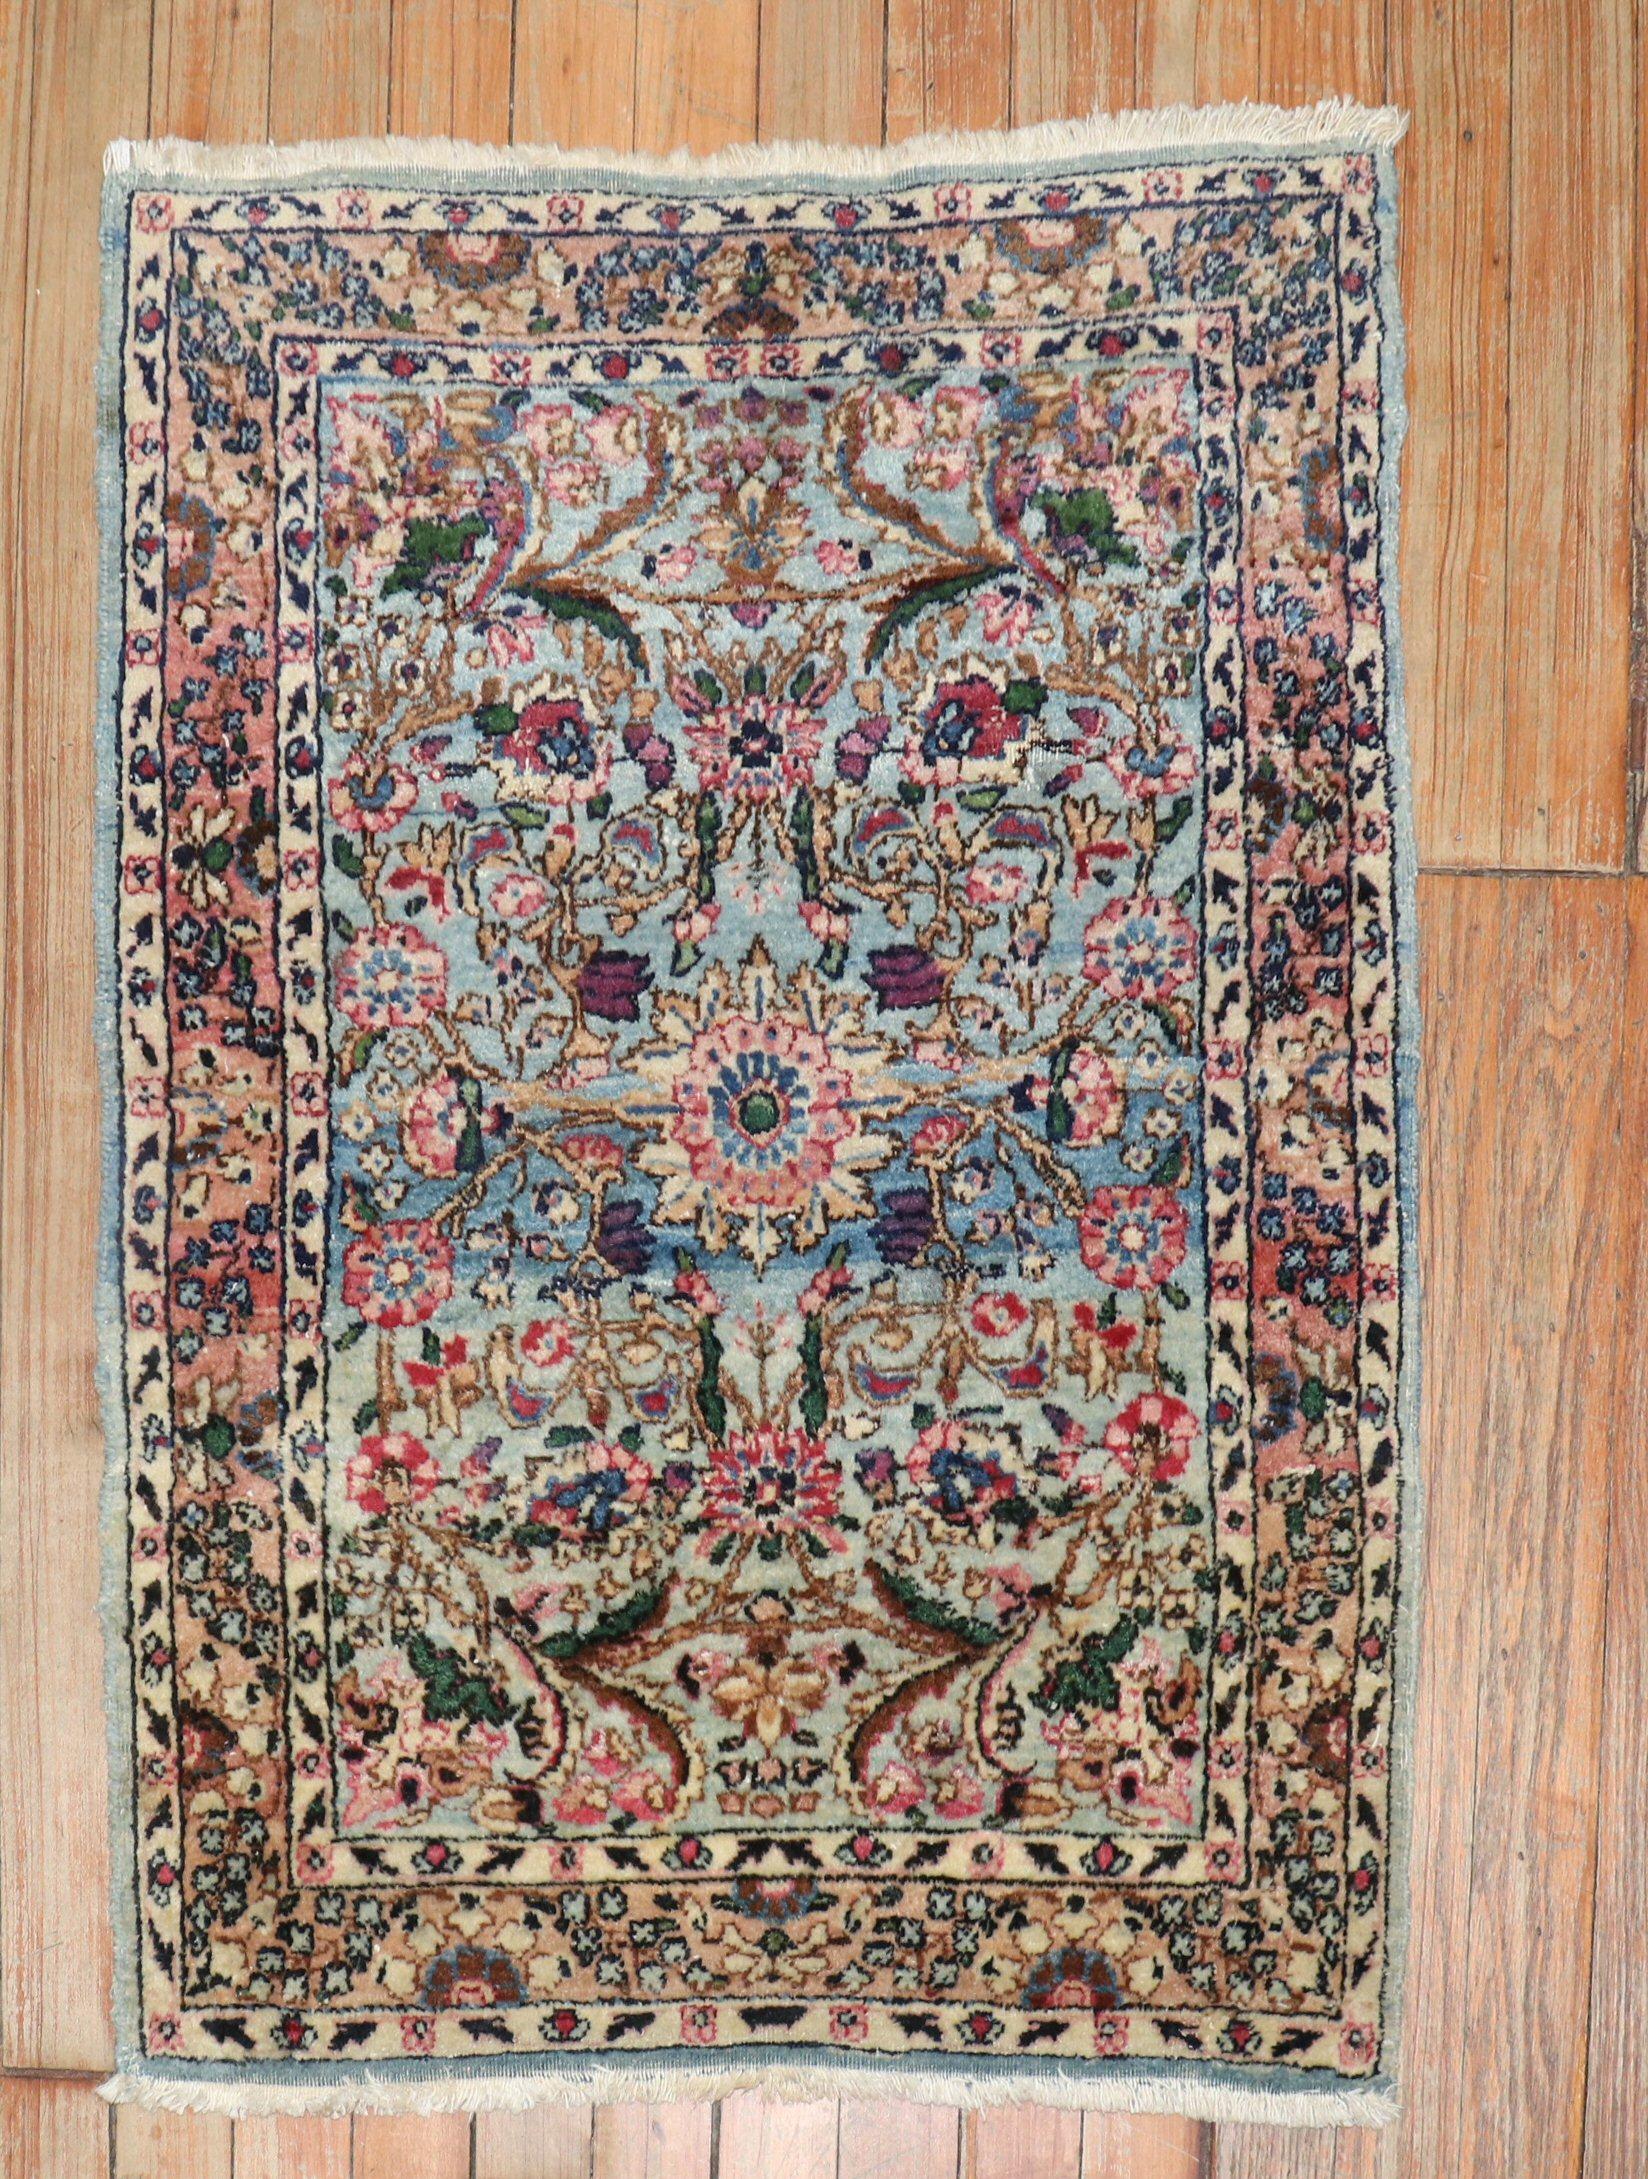 An early 20th-century Persian Kerman traditional mat-size rug.

Measures: 2' x 2.9